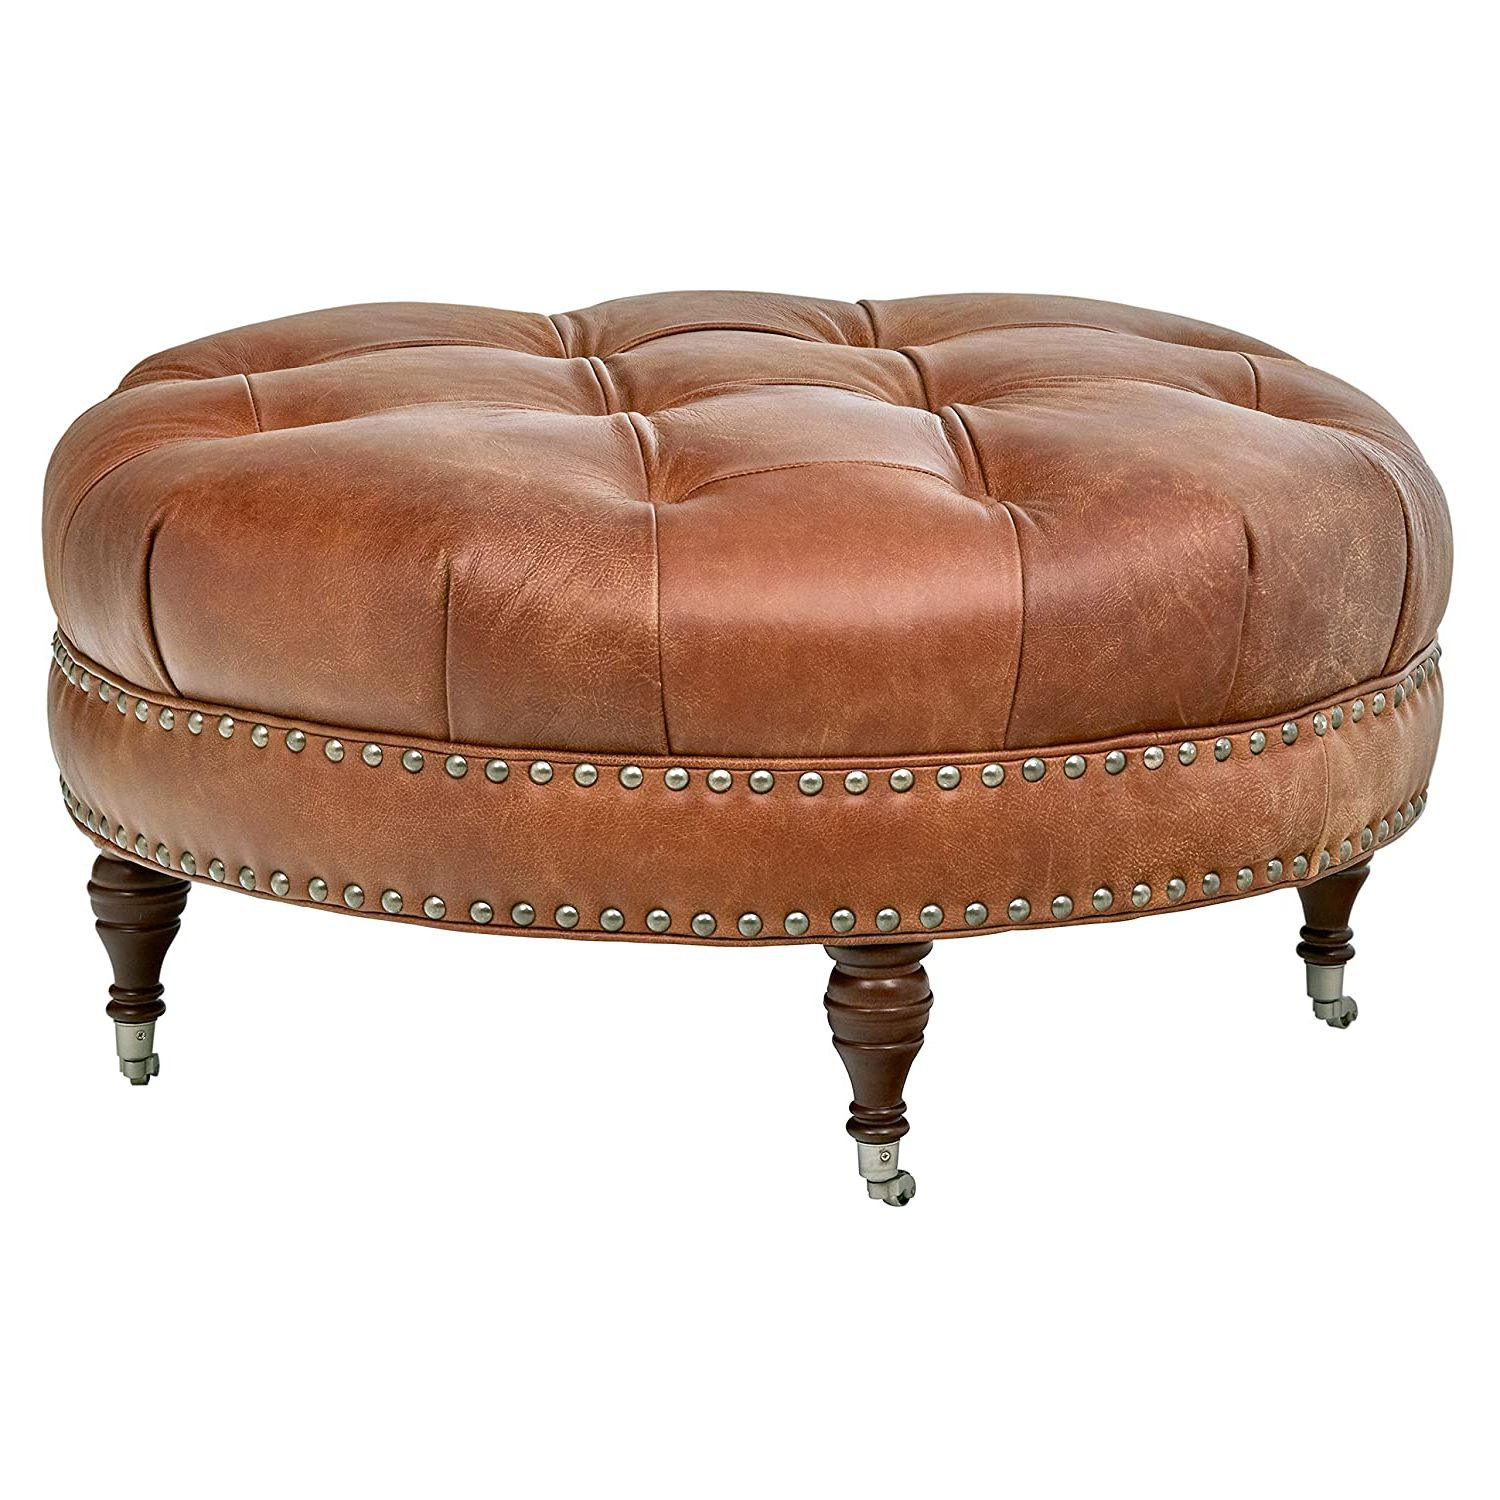 Best Leather Round Pouf Ottoman – Your House With 2020 Round Pouf Ottomans (View 7 of 10)